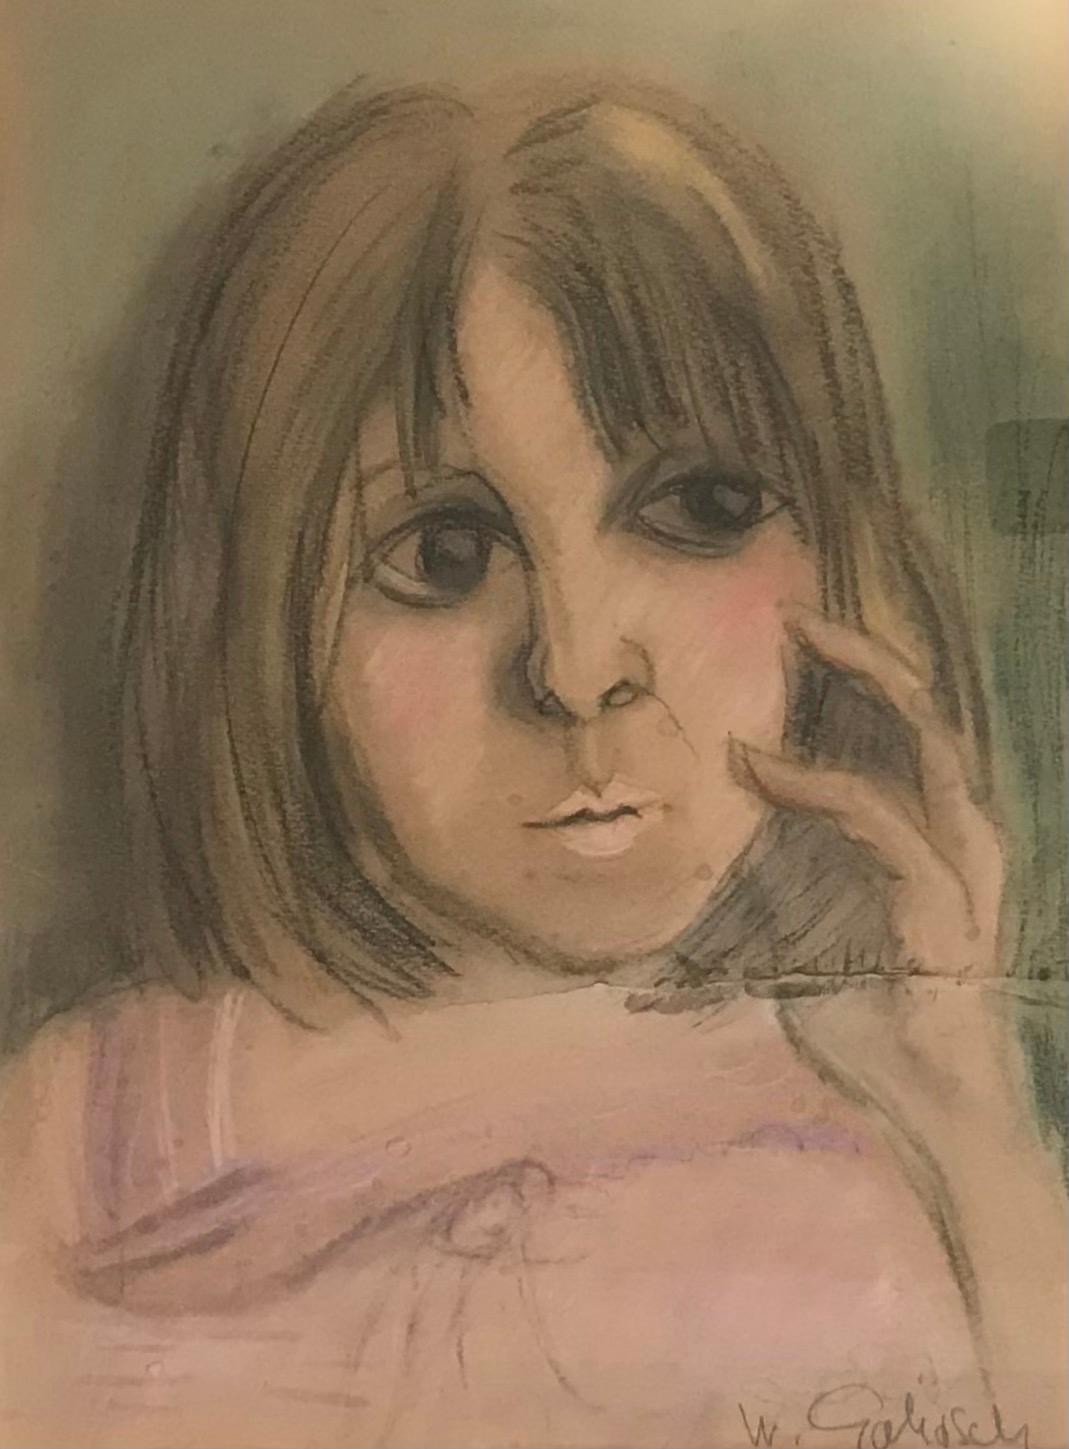 Pensive young woman by William Goliasch - Pastel on paper